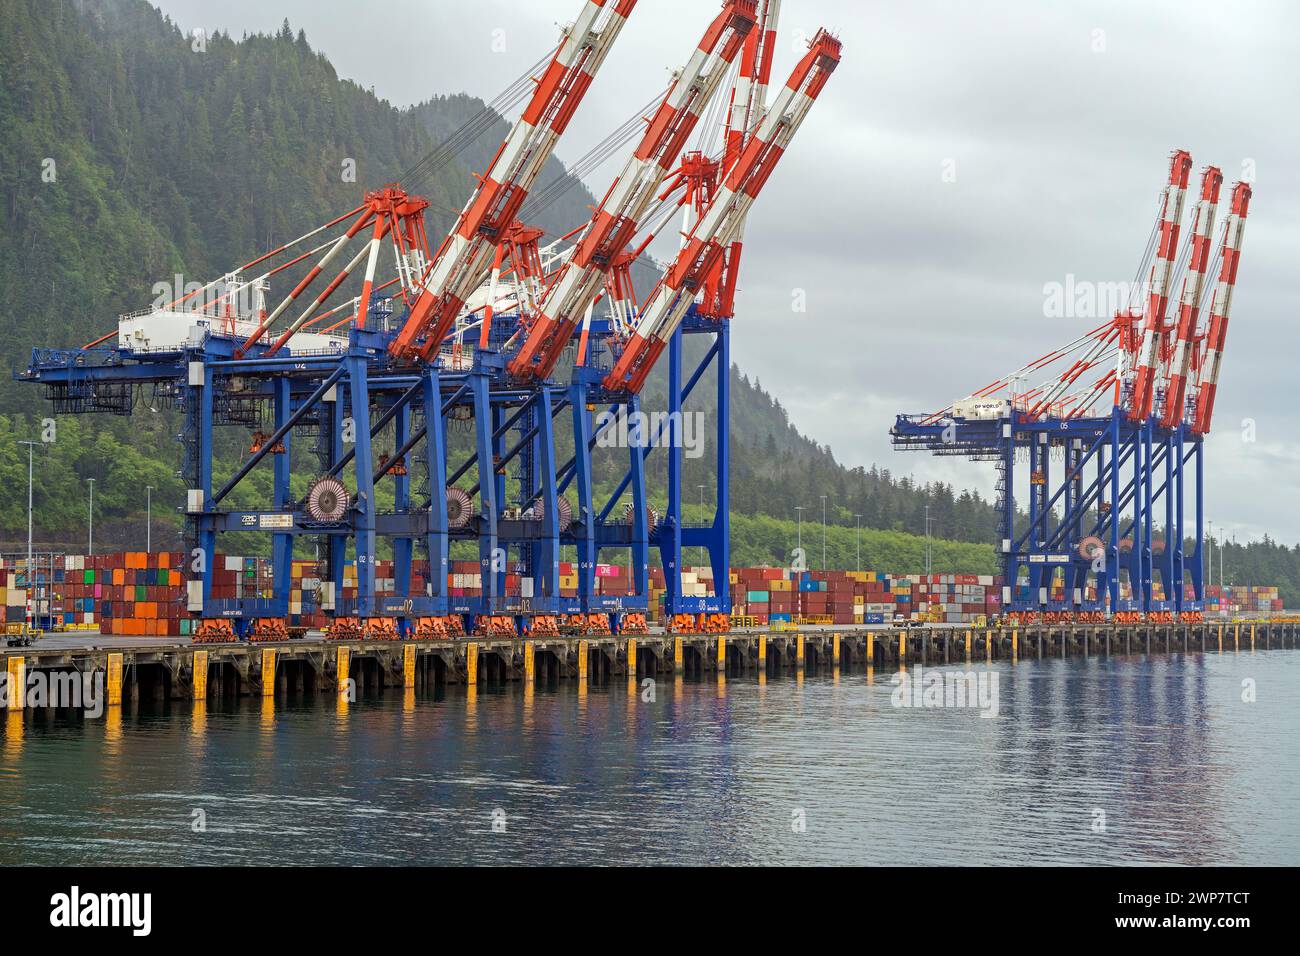 Harbour cranes with containers in Prince Rupert harbour, British Columbia, Canada. Stock Photo